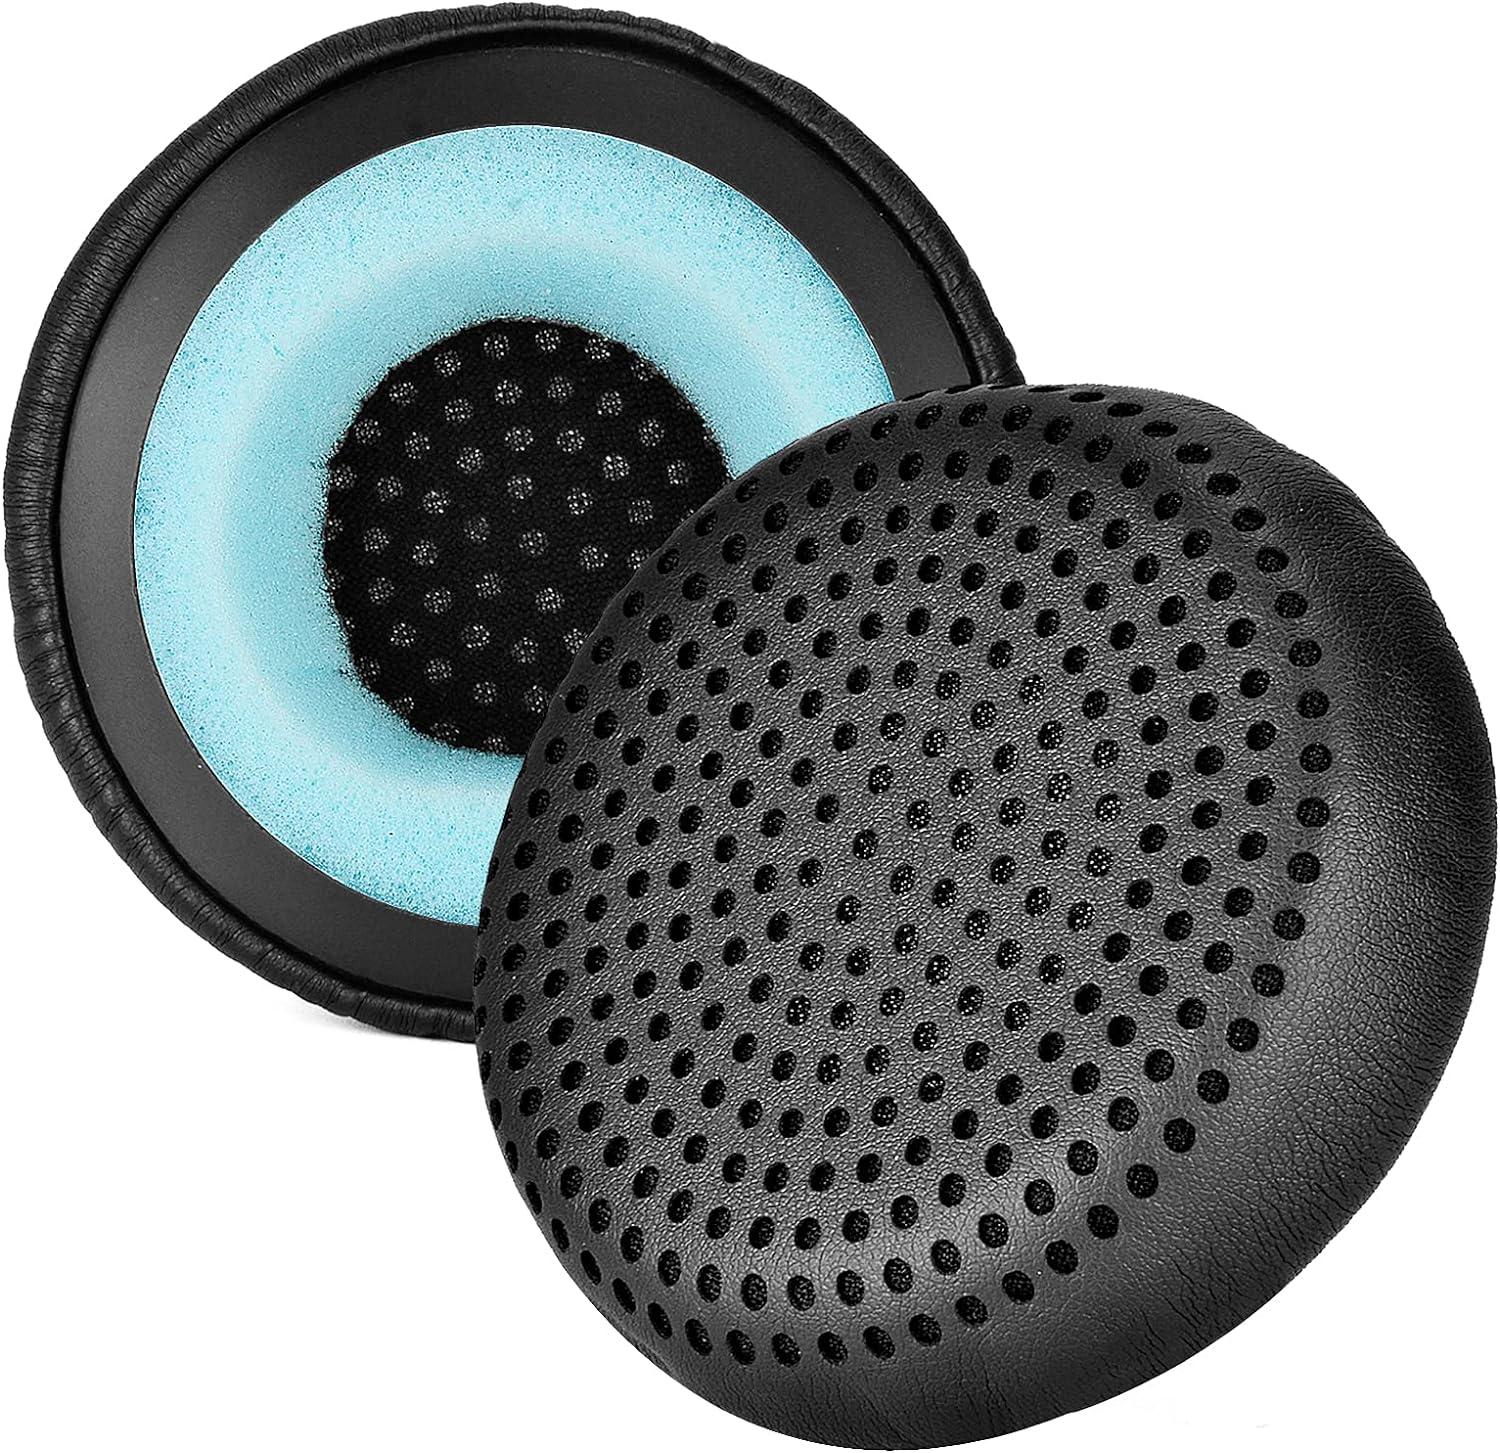 Memory Foam Earpads Replacement for Skullcandy Grind